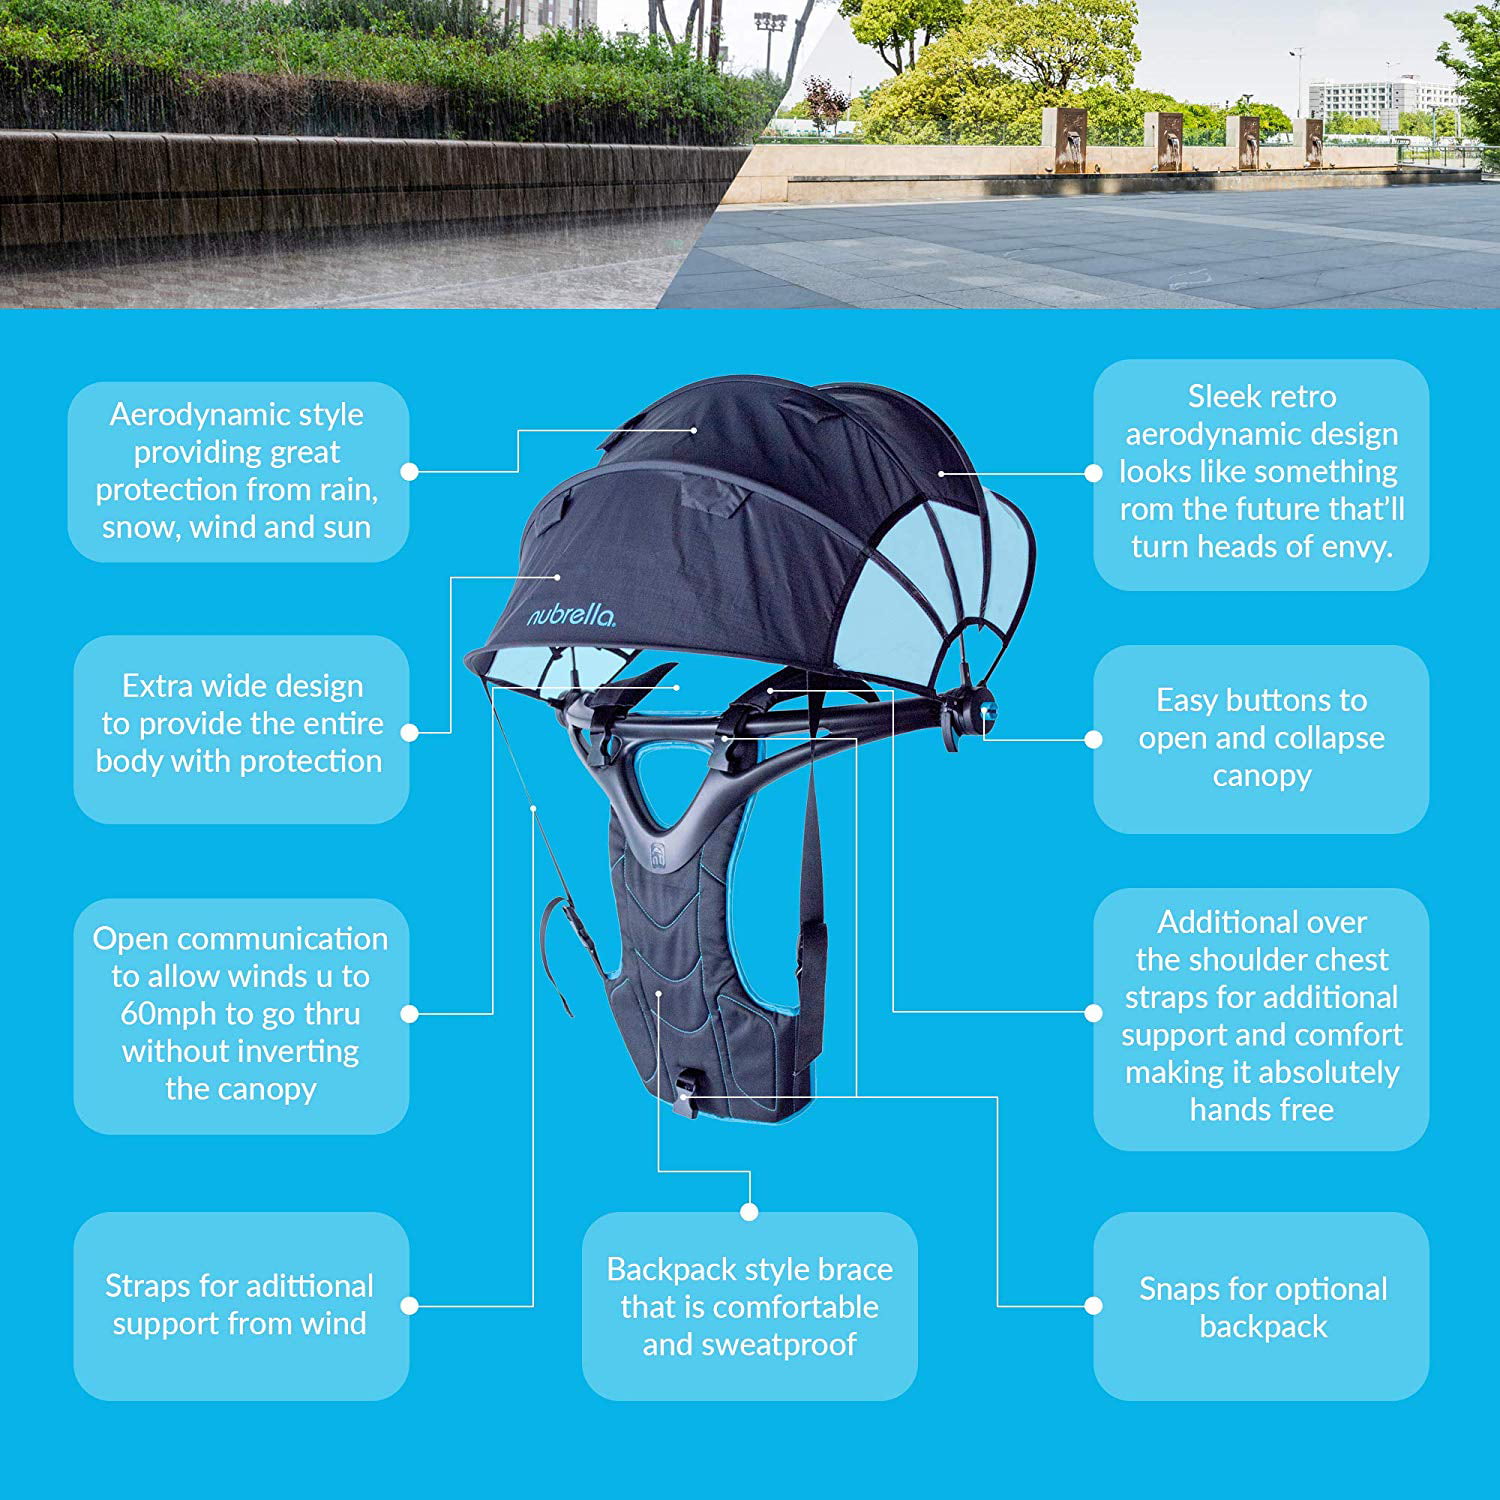  Mister Coolz Hands Free Umbrella Holder, Backpack Umbrella  Holder, Portable Umbrella Holder, Wearable Umbrella Holder, Umbrella Holder  Backpack. (Umbrella NOT Included) : Sports & Outdoors